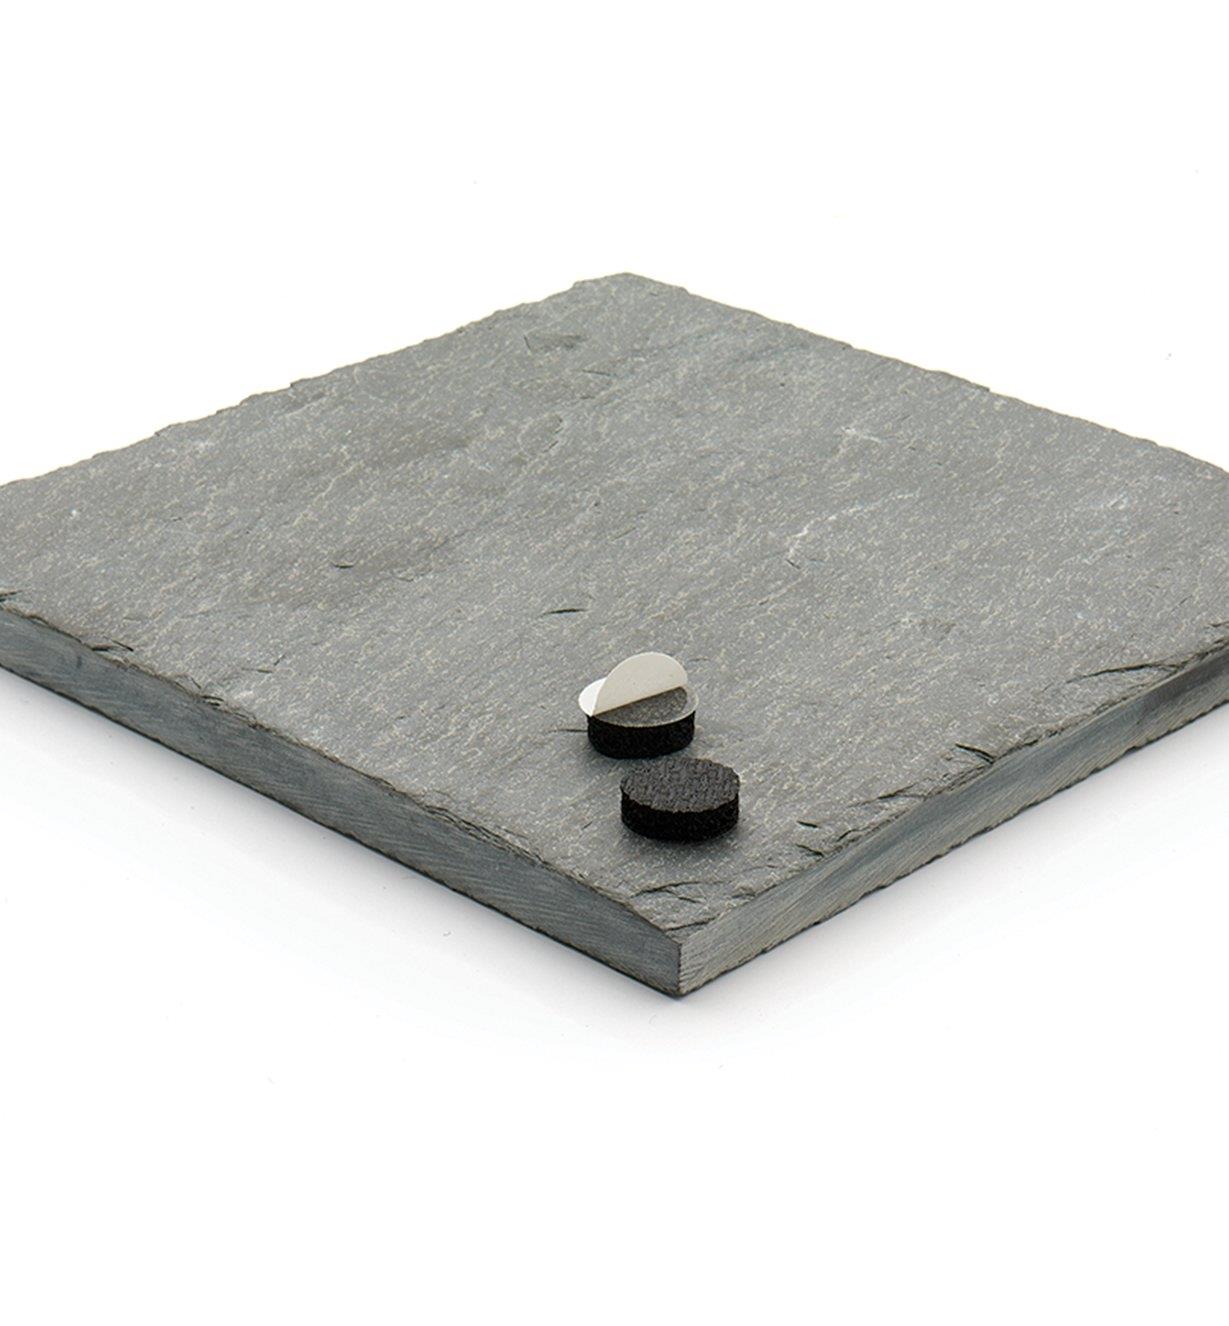 Two 3/8" Pads sitting on a square piece of slate